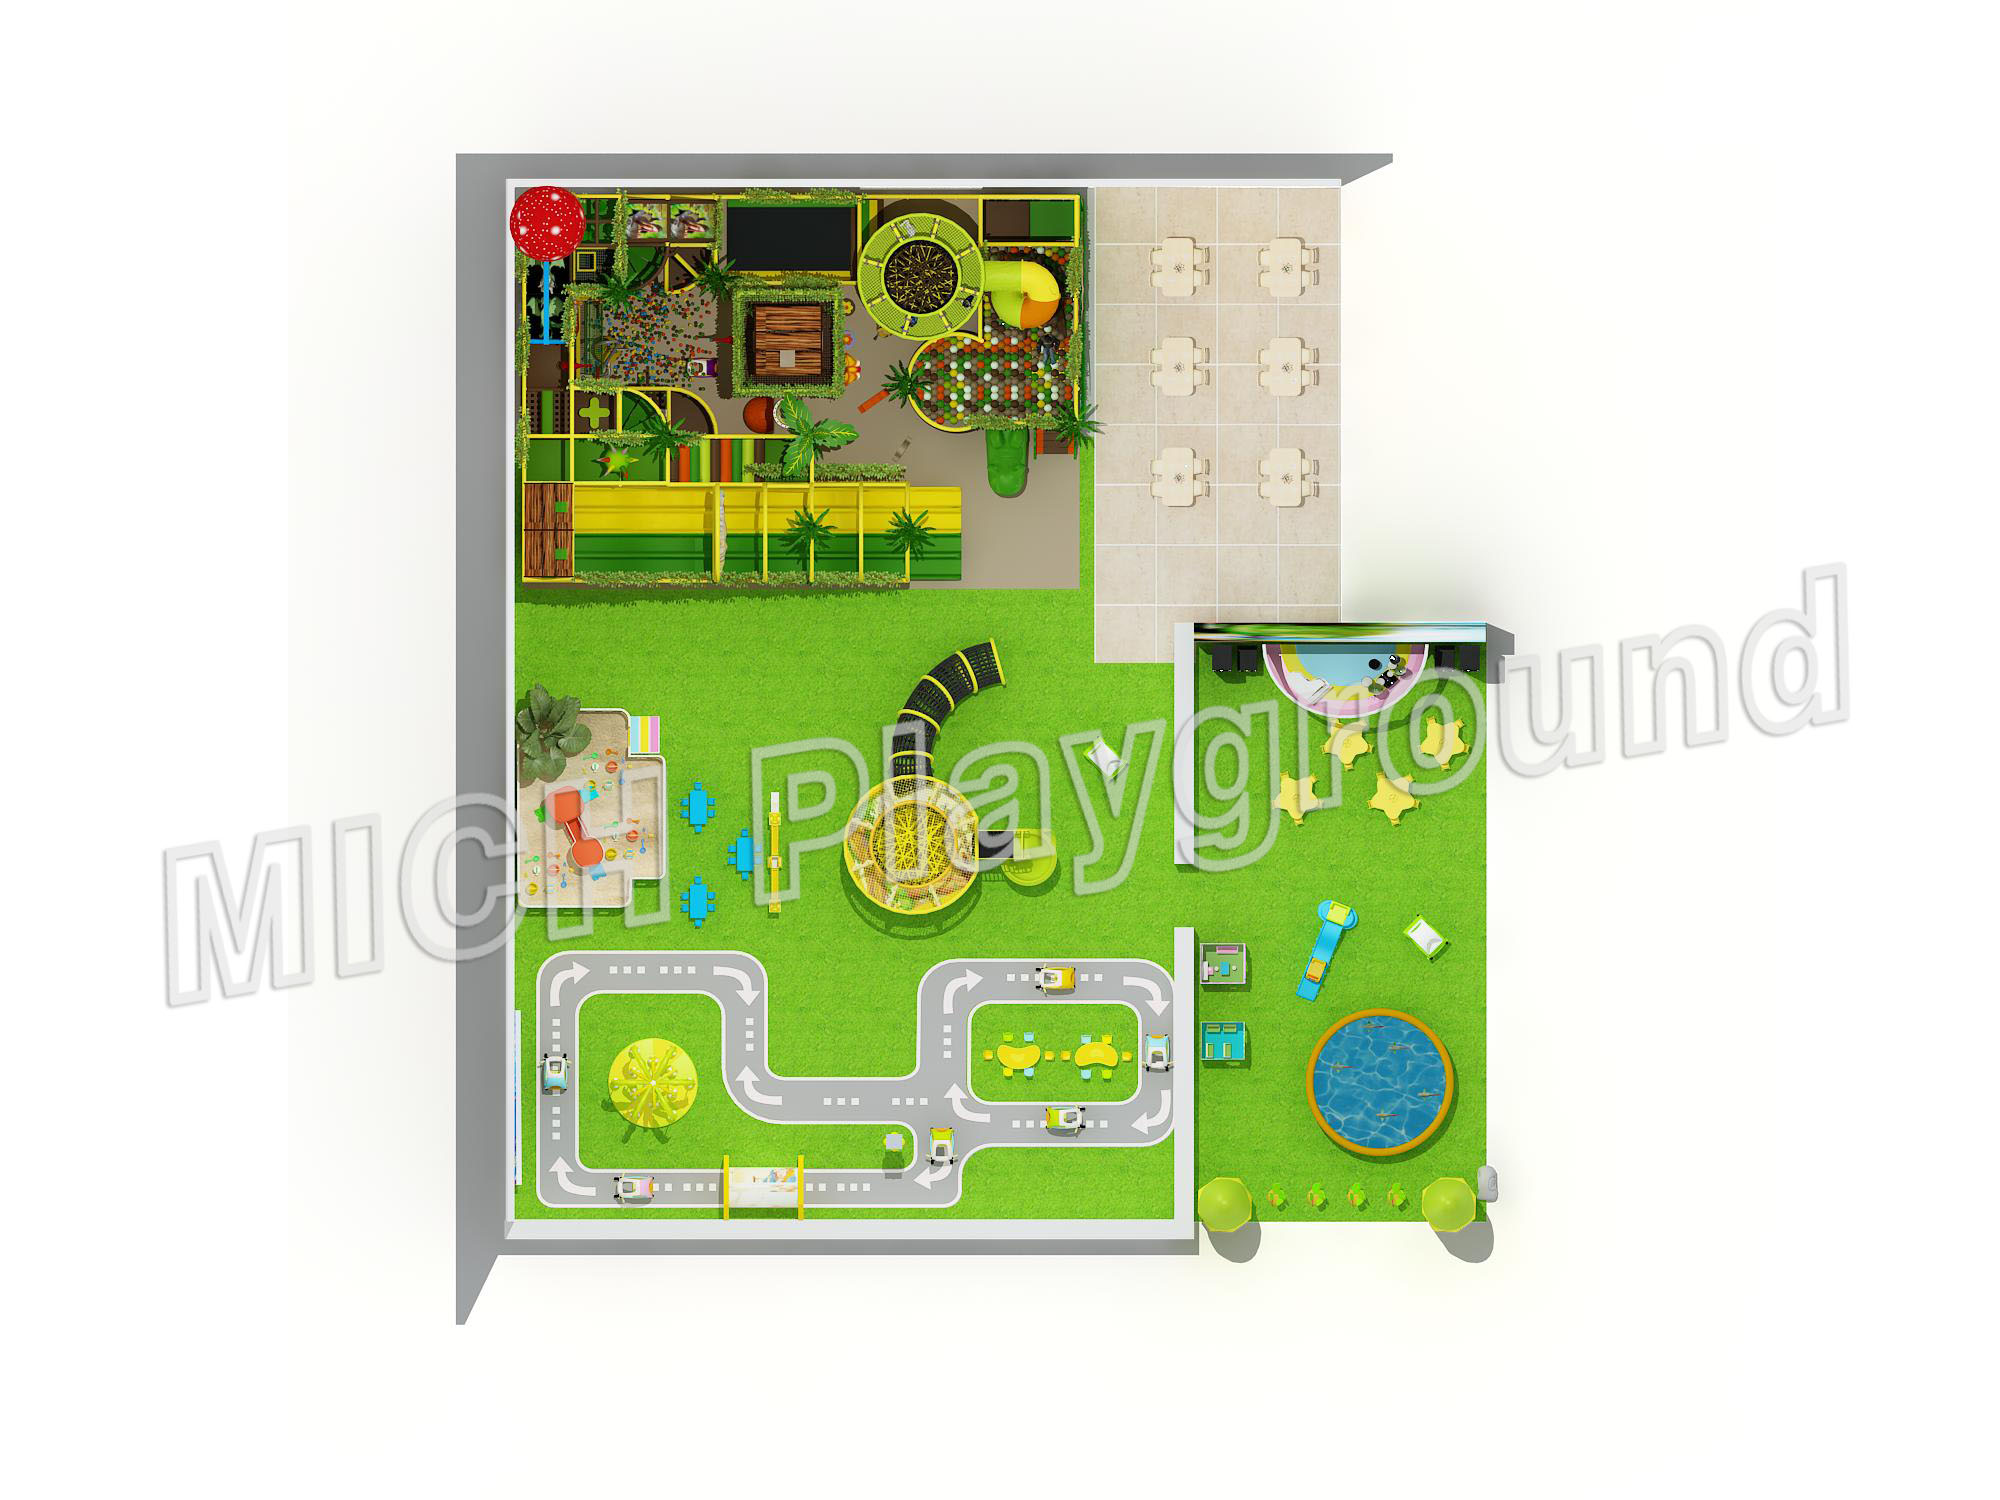 ASTM Certificated Jungle theme indoor play area